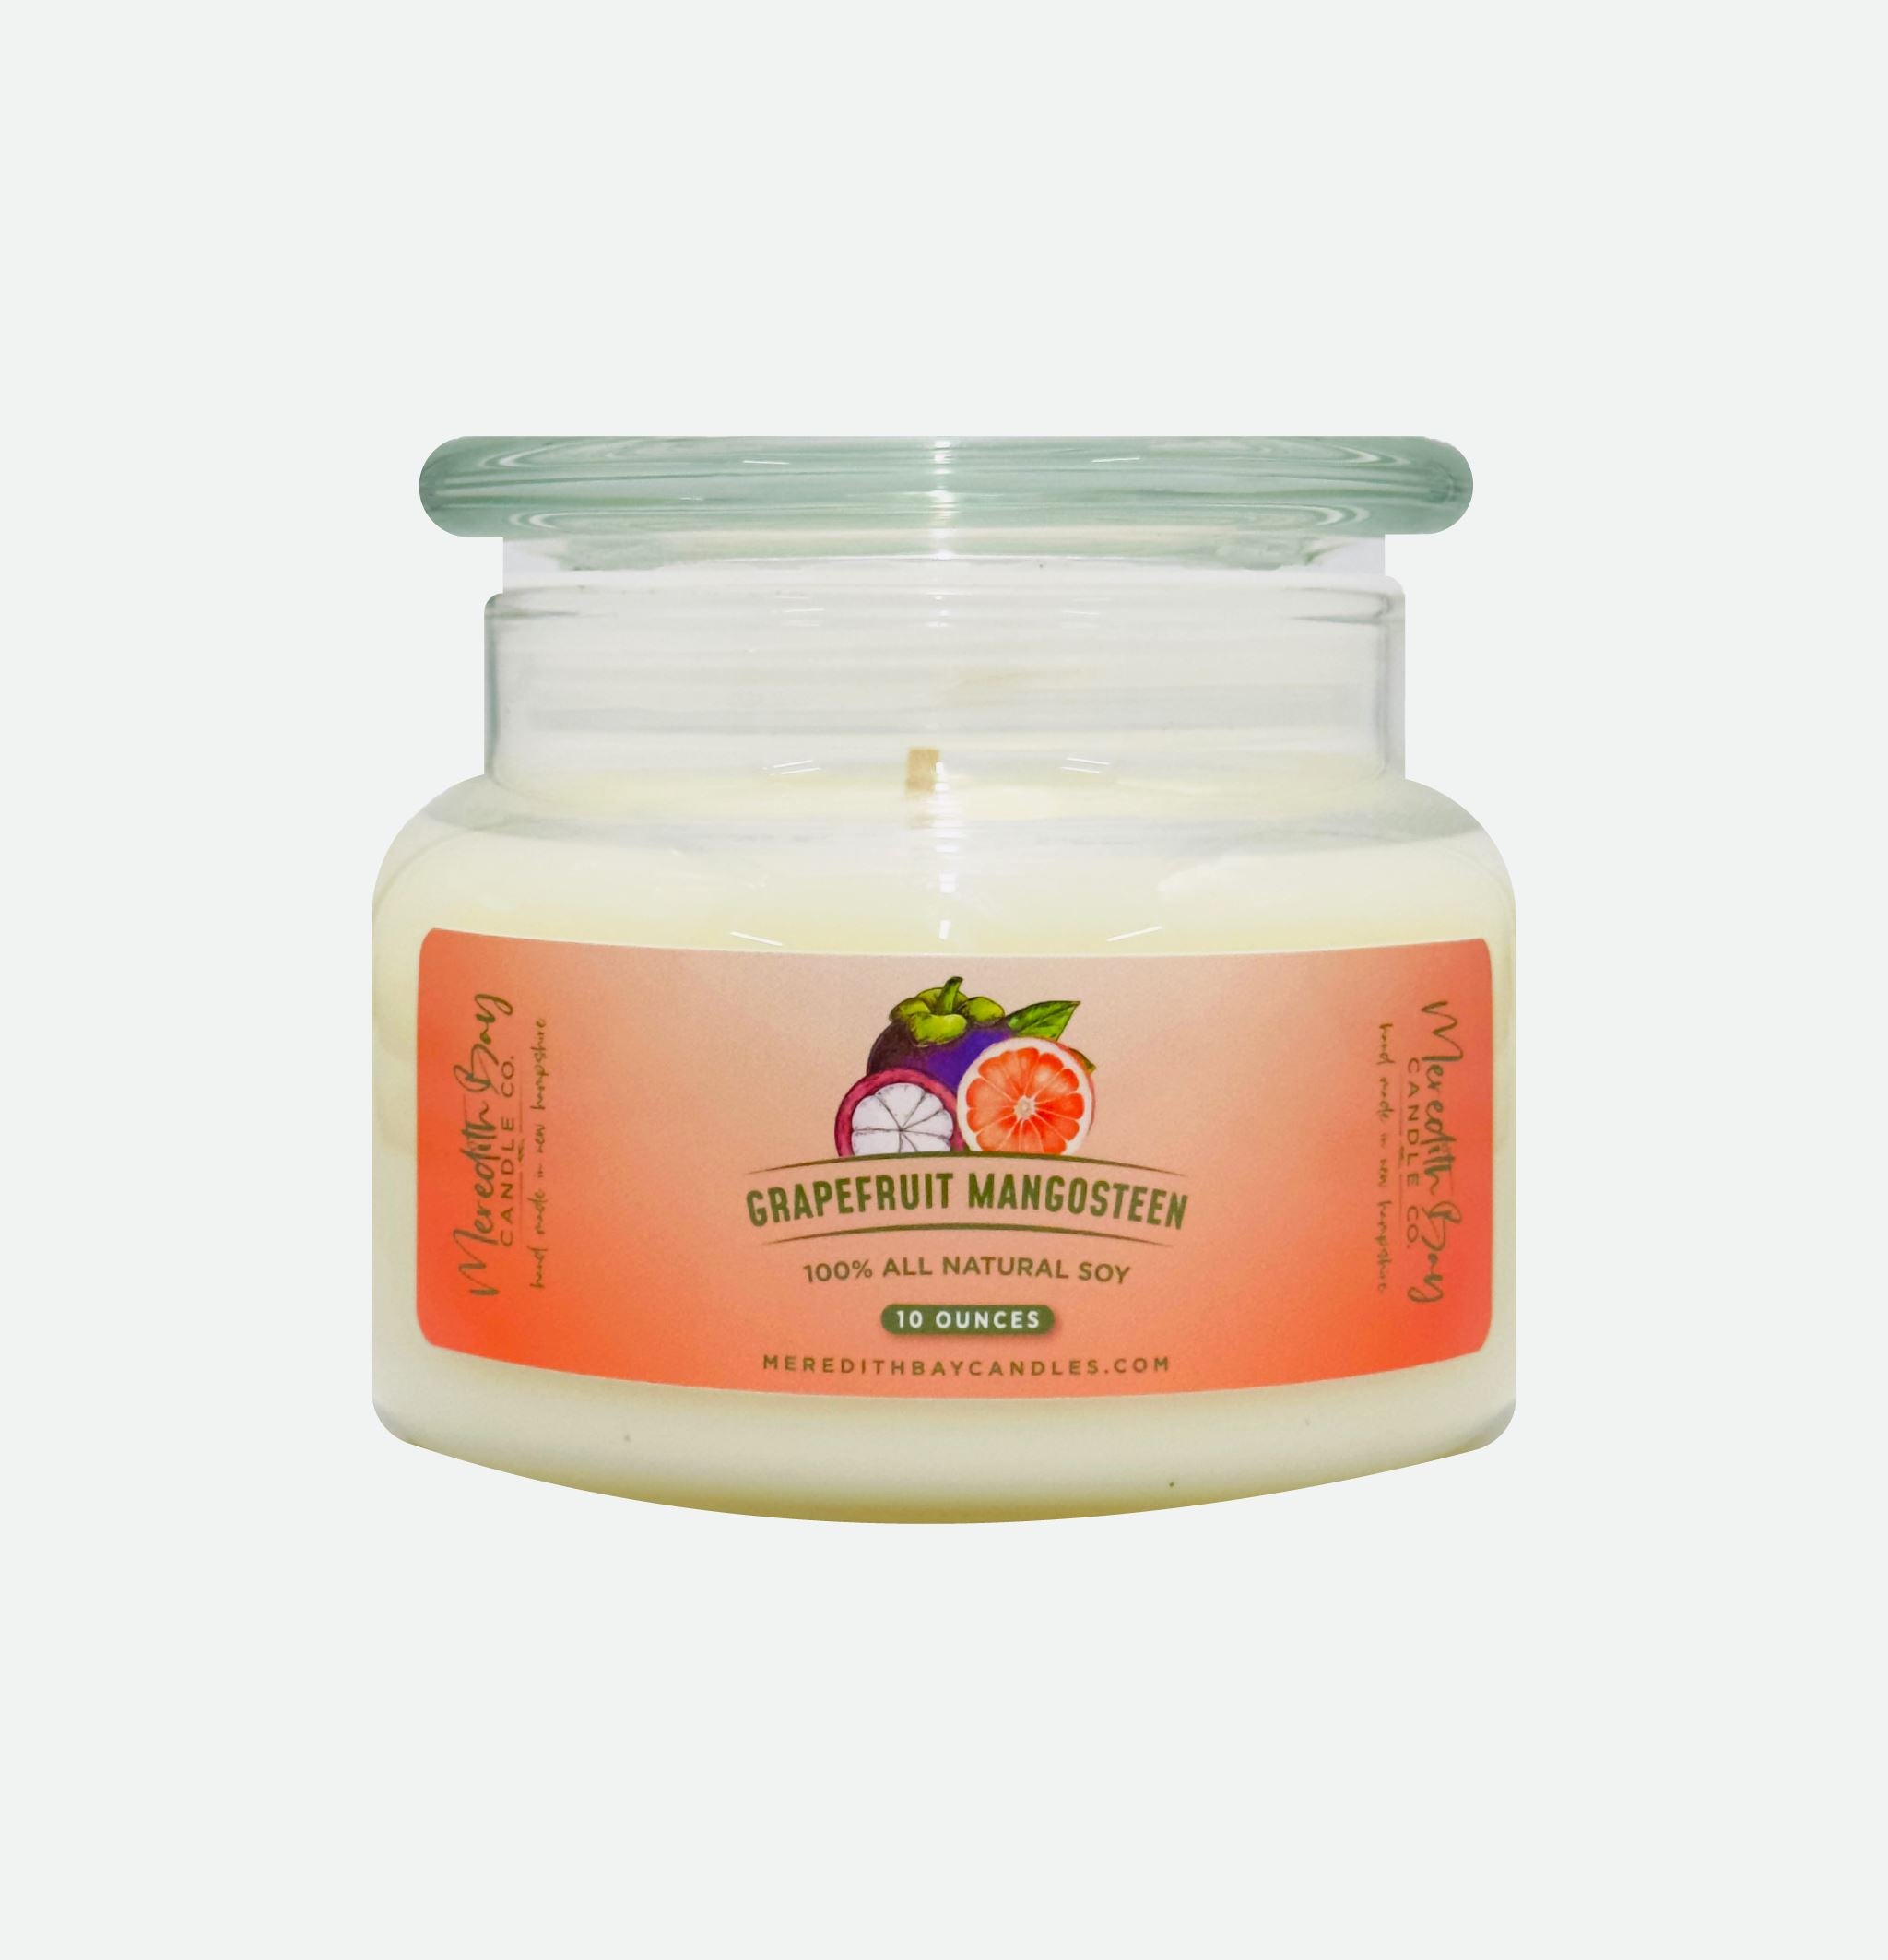 Grapefruit Mangosteen Soy Candle Meredith Bay Candle Co 10 Oz 